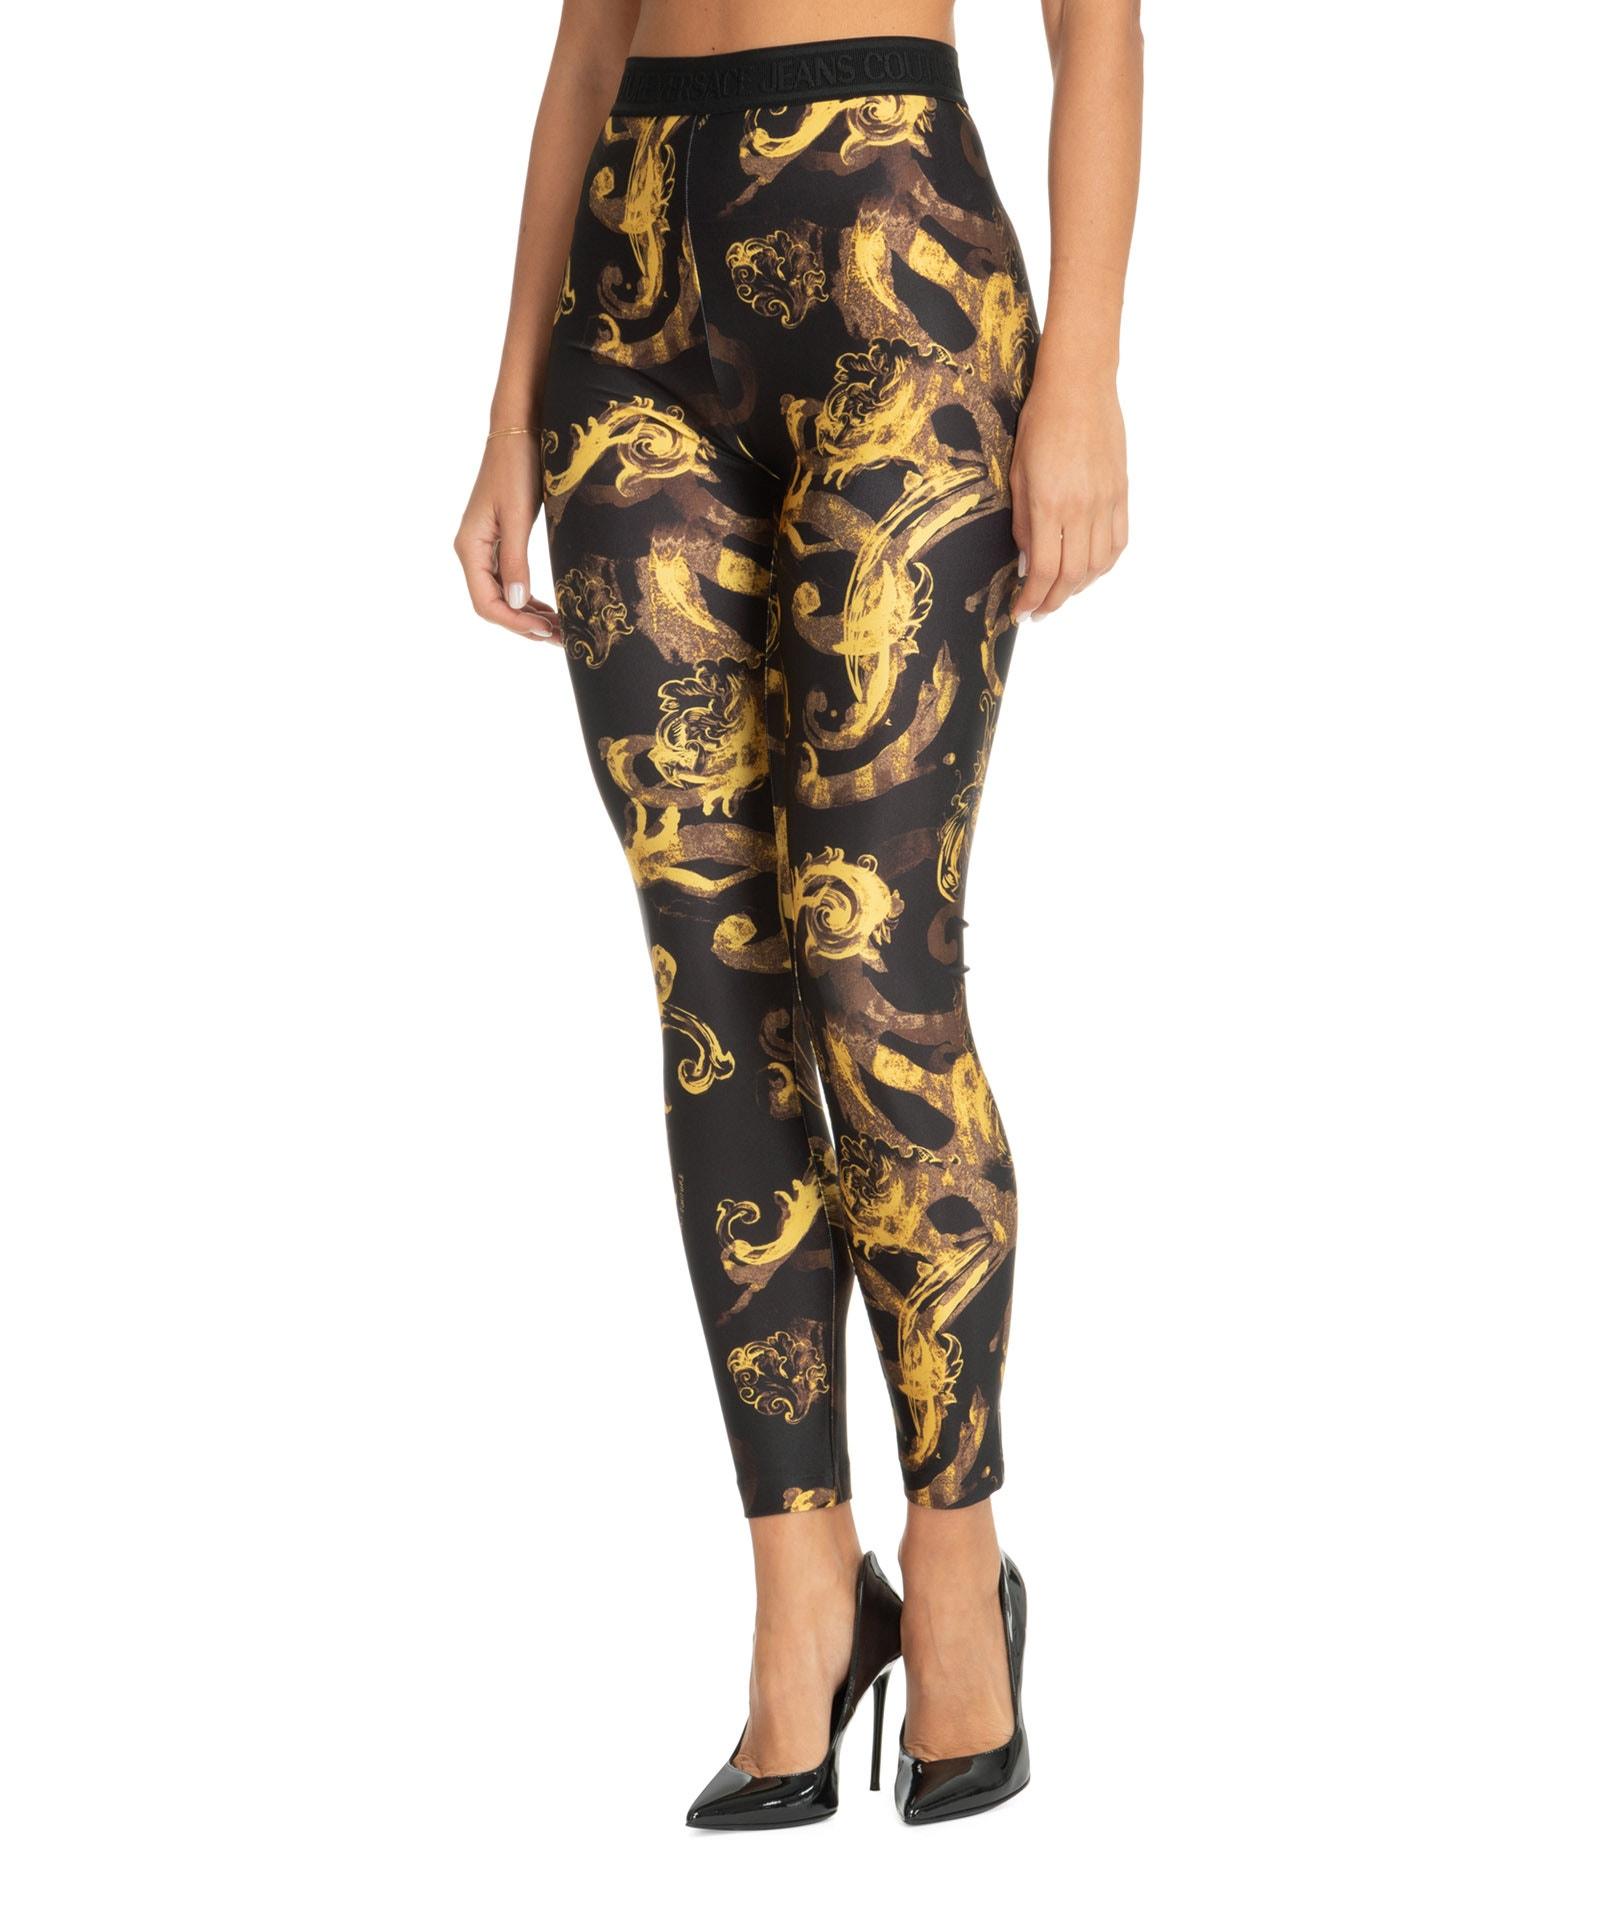 Versace Jeans Couture Logo Couture Legging in Gold & Black